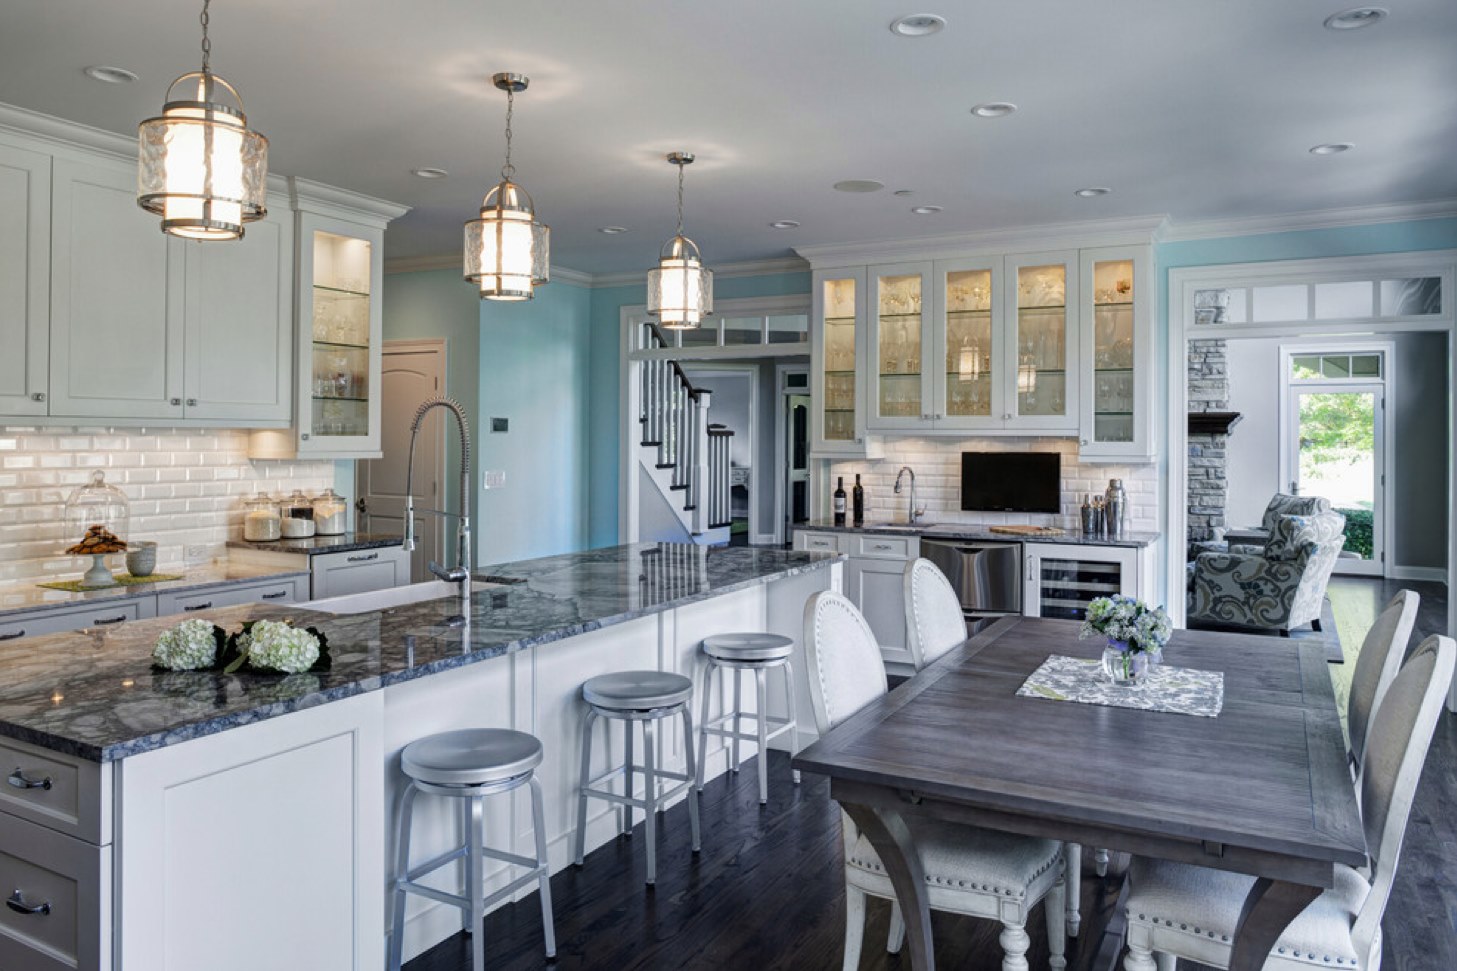 Do you like the color combination of whites, grays and blues in this kitchen?…